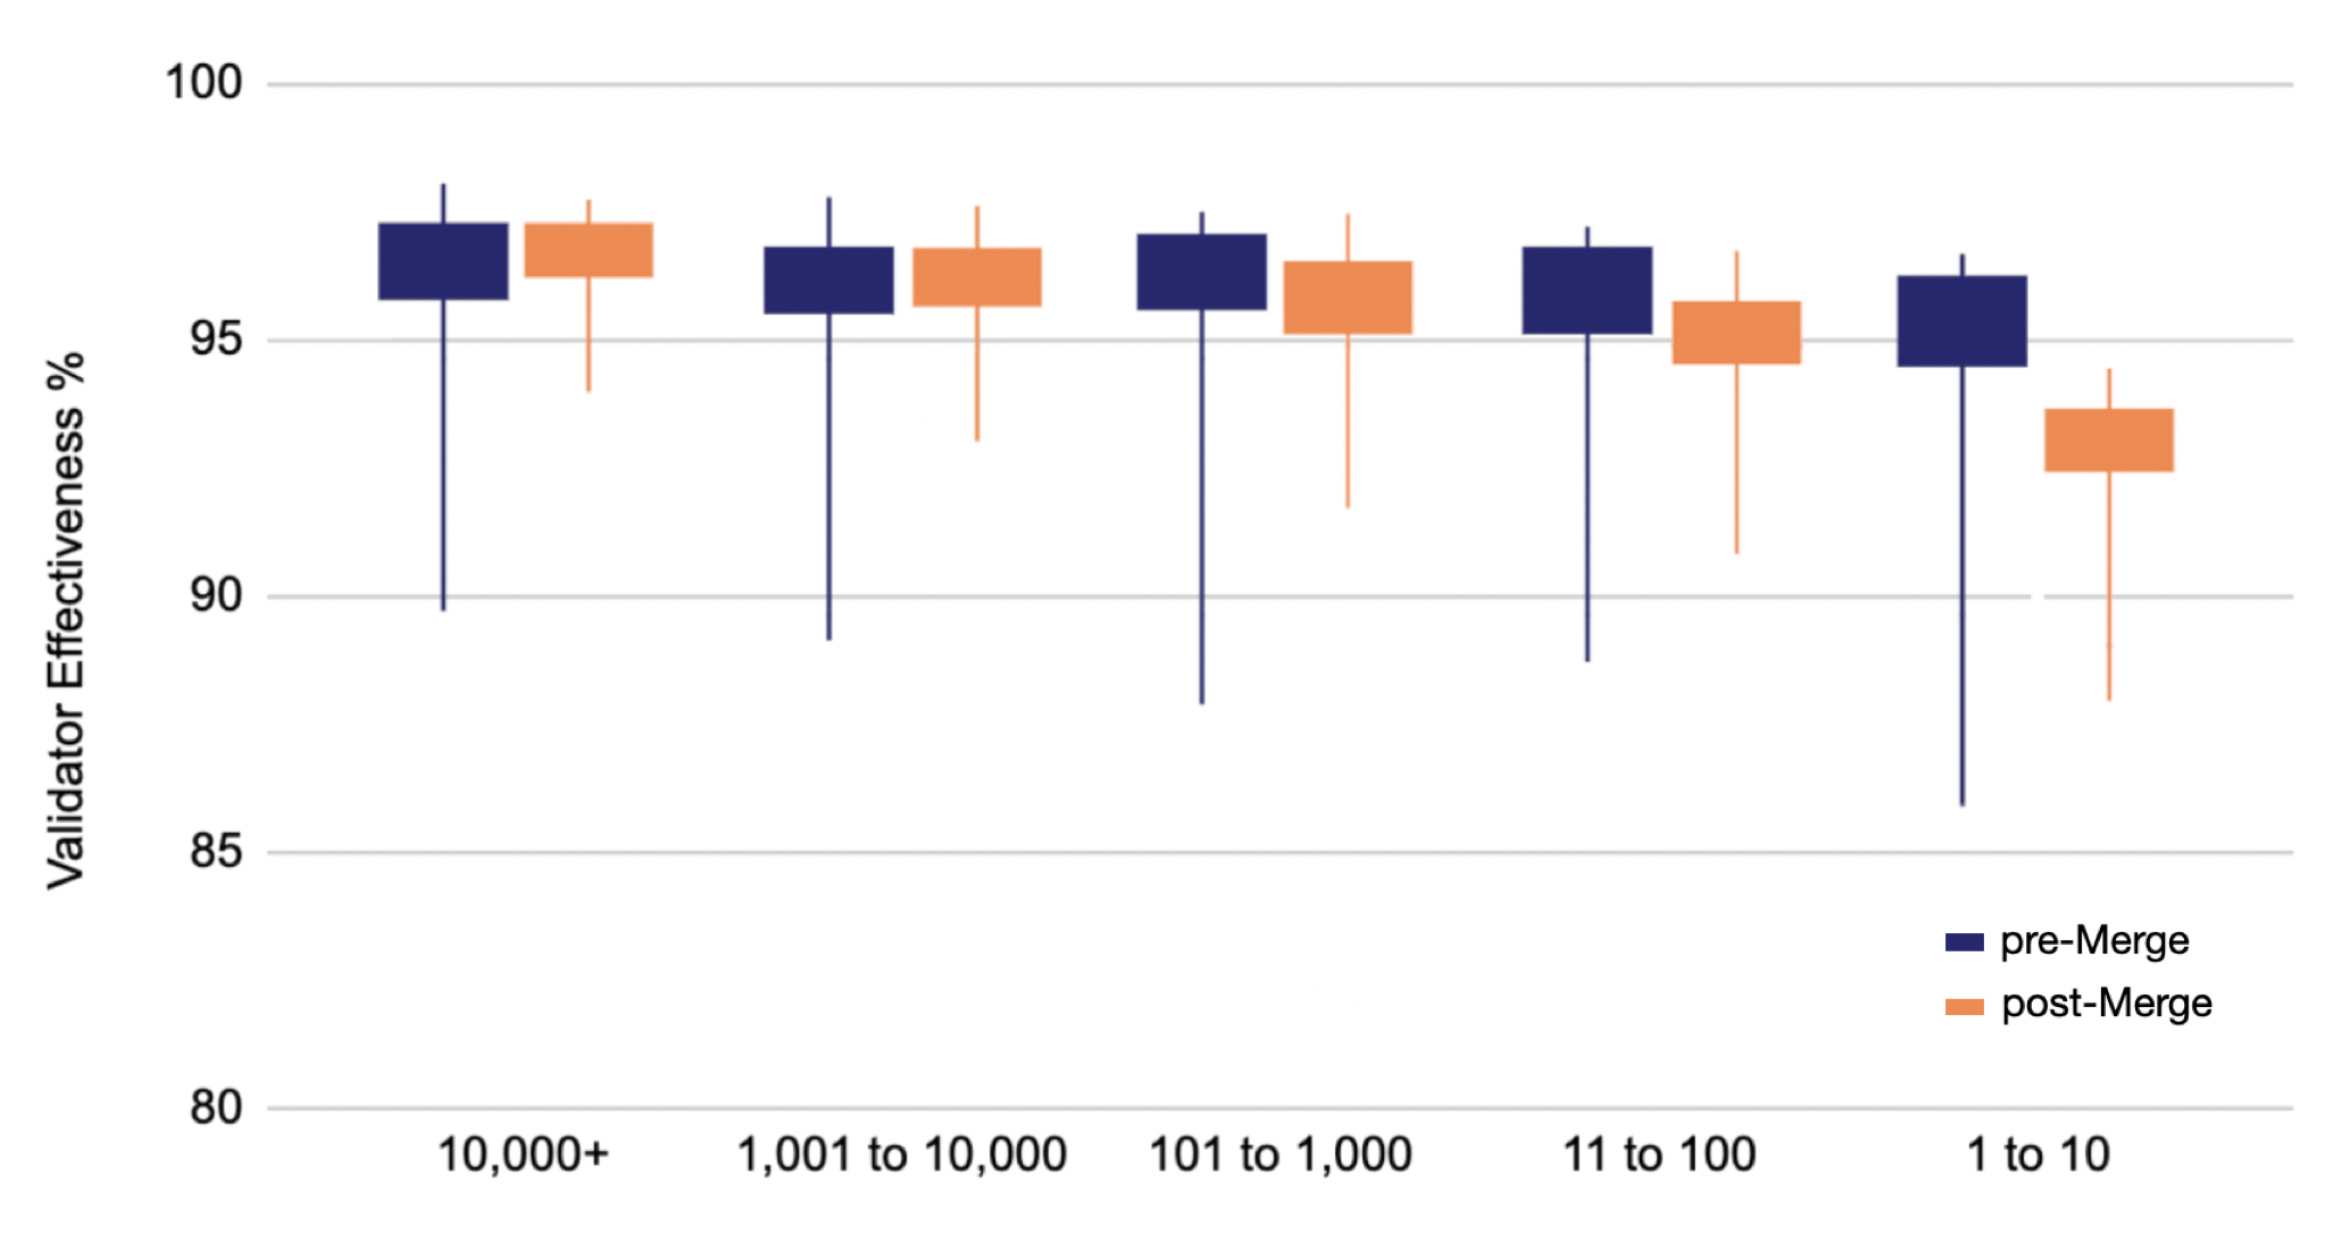 Figure 7: Boxplots of validator effectiveness by cohort in the pre- and post- Merge periods of the sample